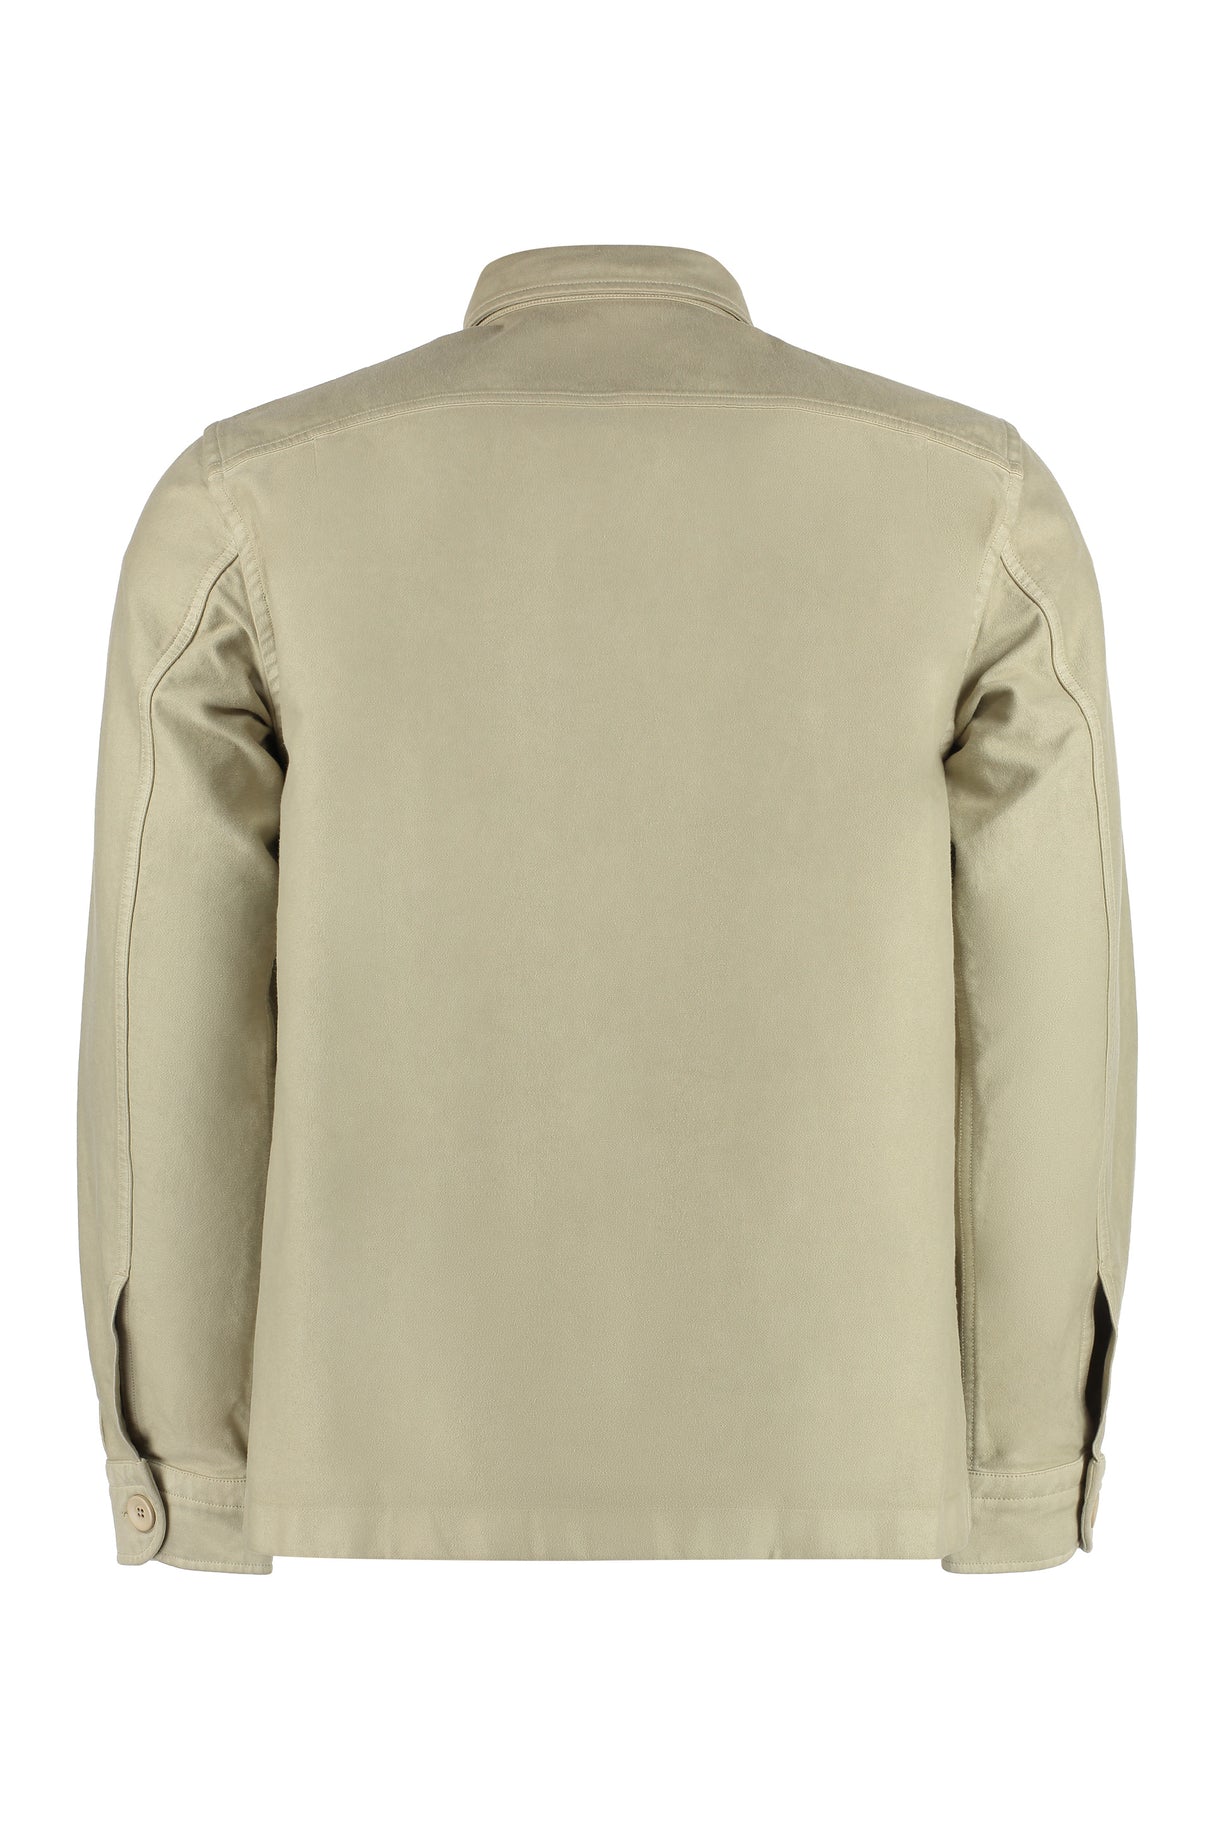 TOM FORD Beige Cotton Overshirt for Men - SS23 Collection